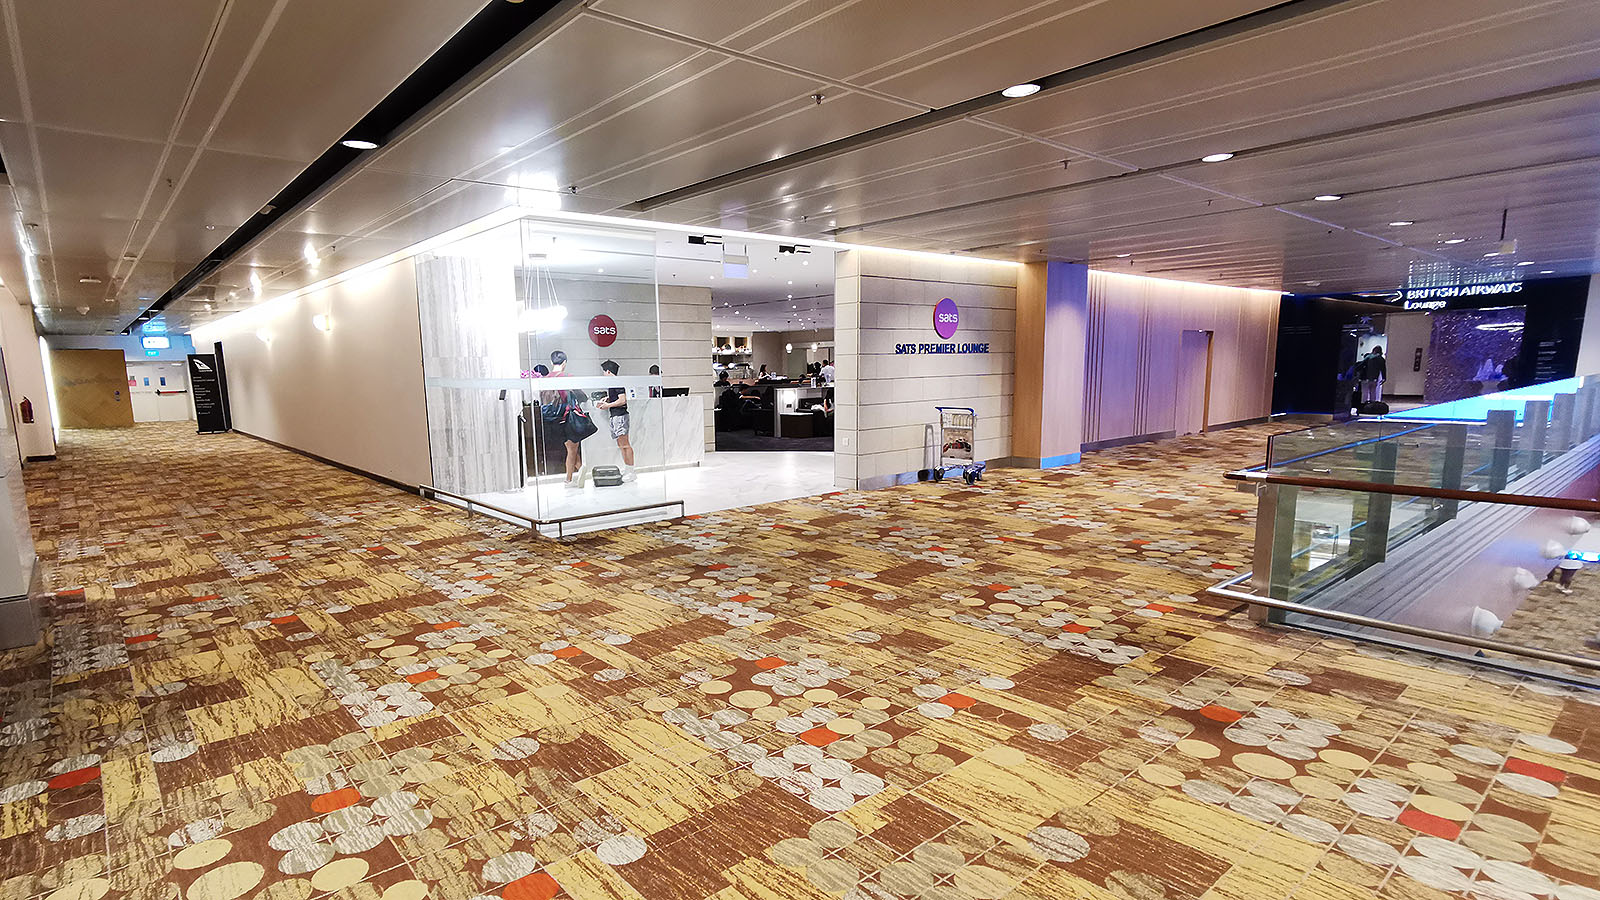 Pathway to the Qantas International Business Lounge in Singapore